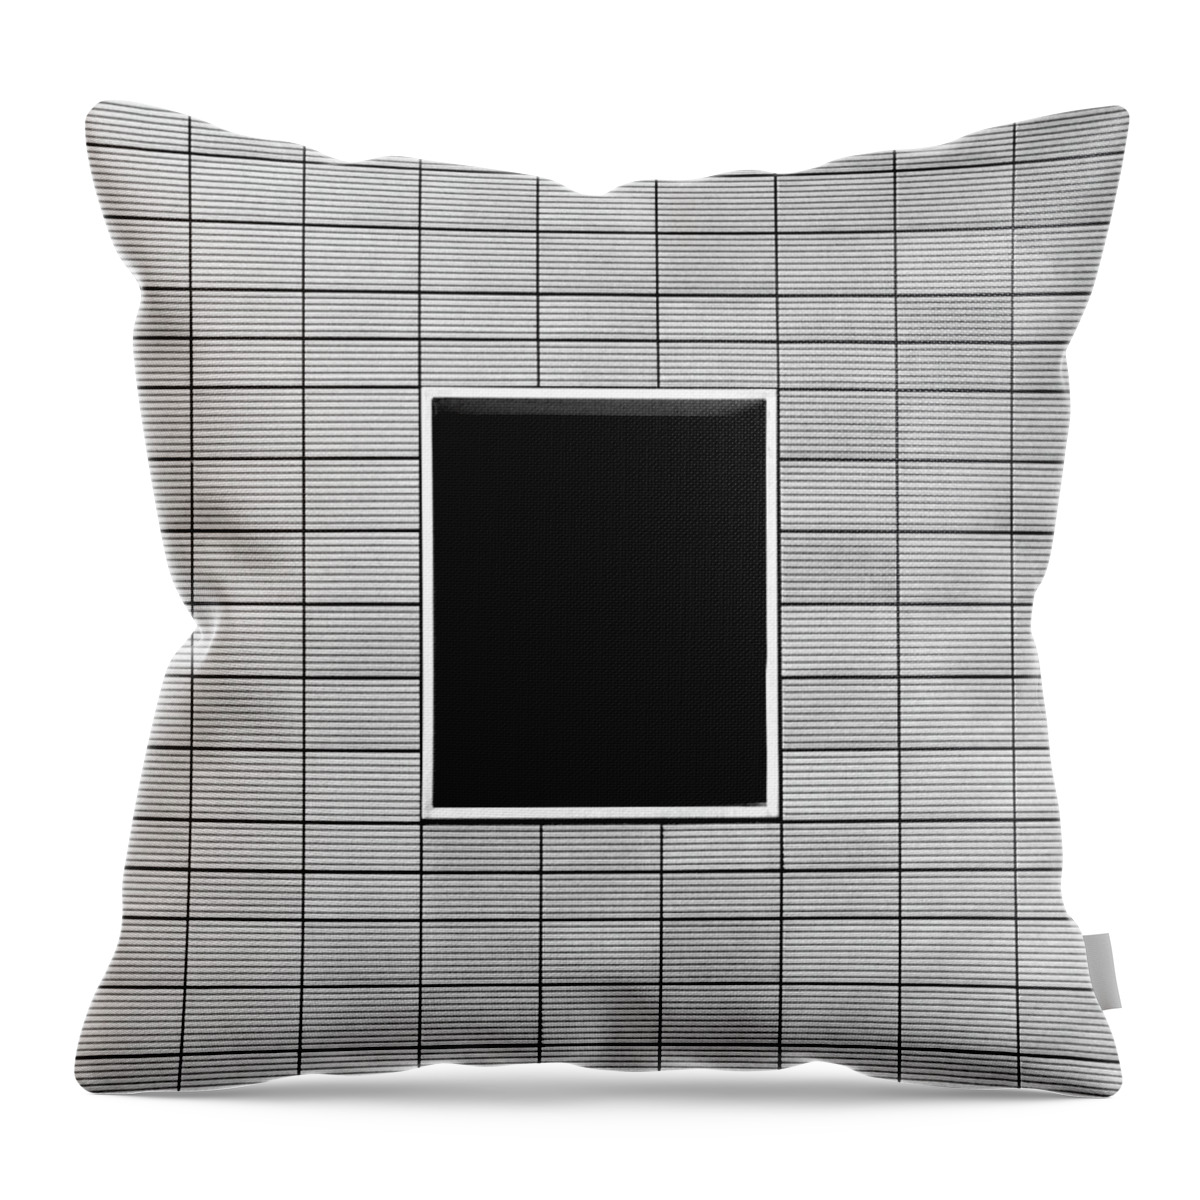 Urban Throw Pillow featuring the photograph Square - Black Hole by Stuart Allen